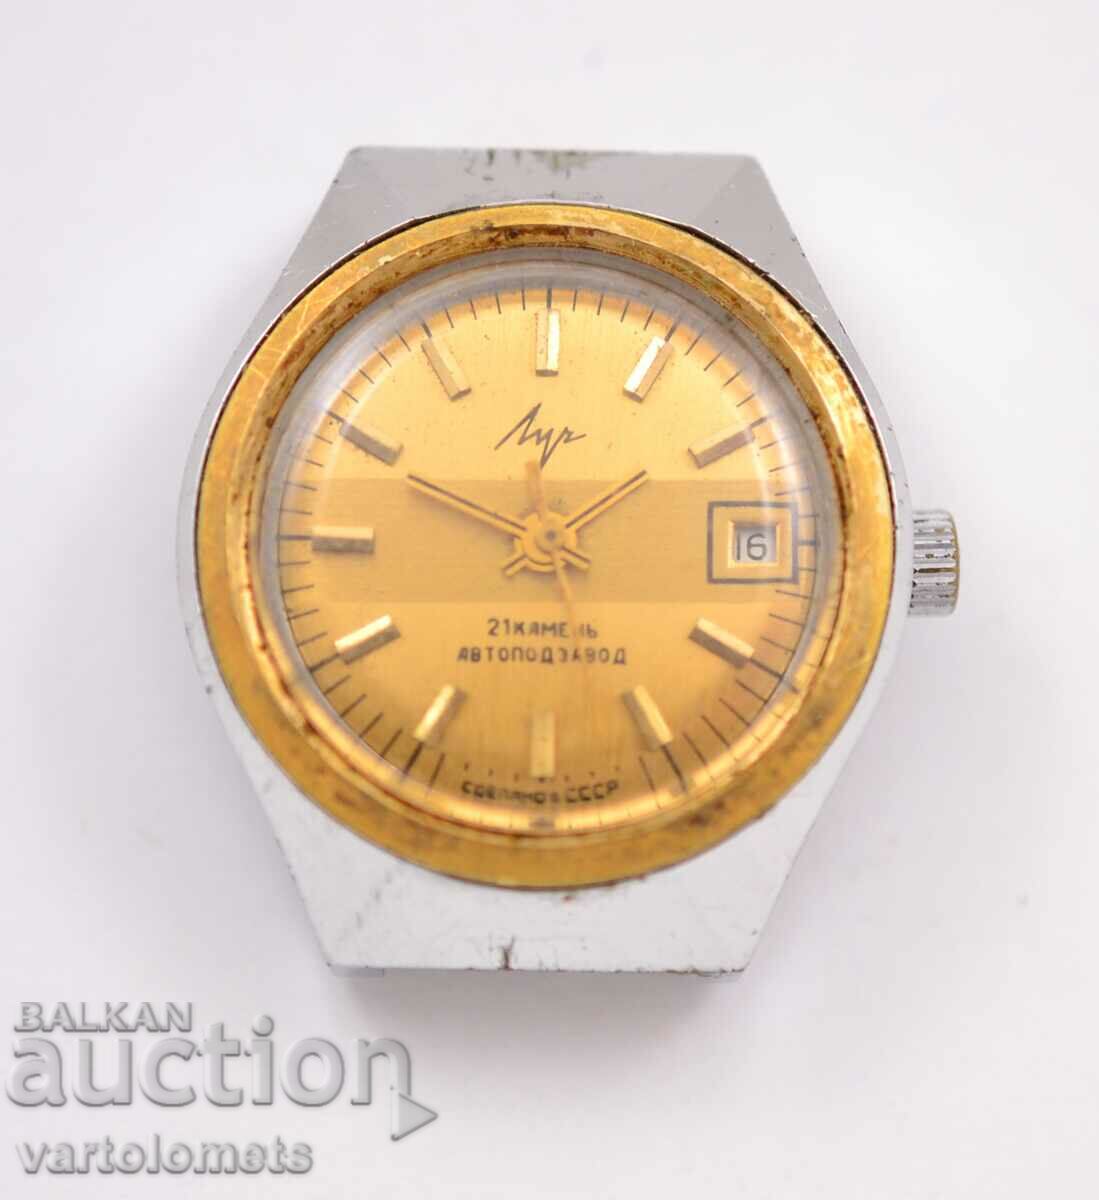 Women's watch LACH AUTOMATIC USSR - works